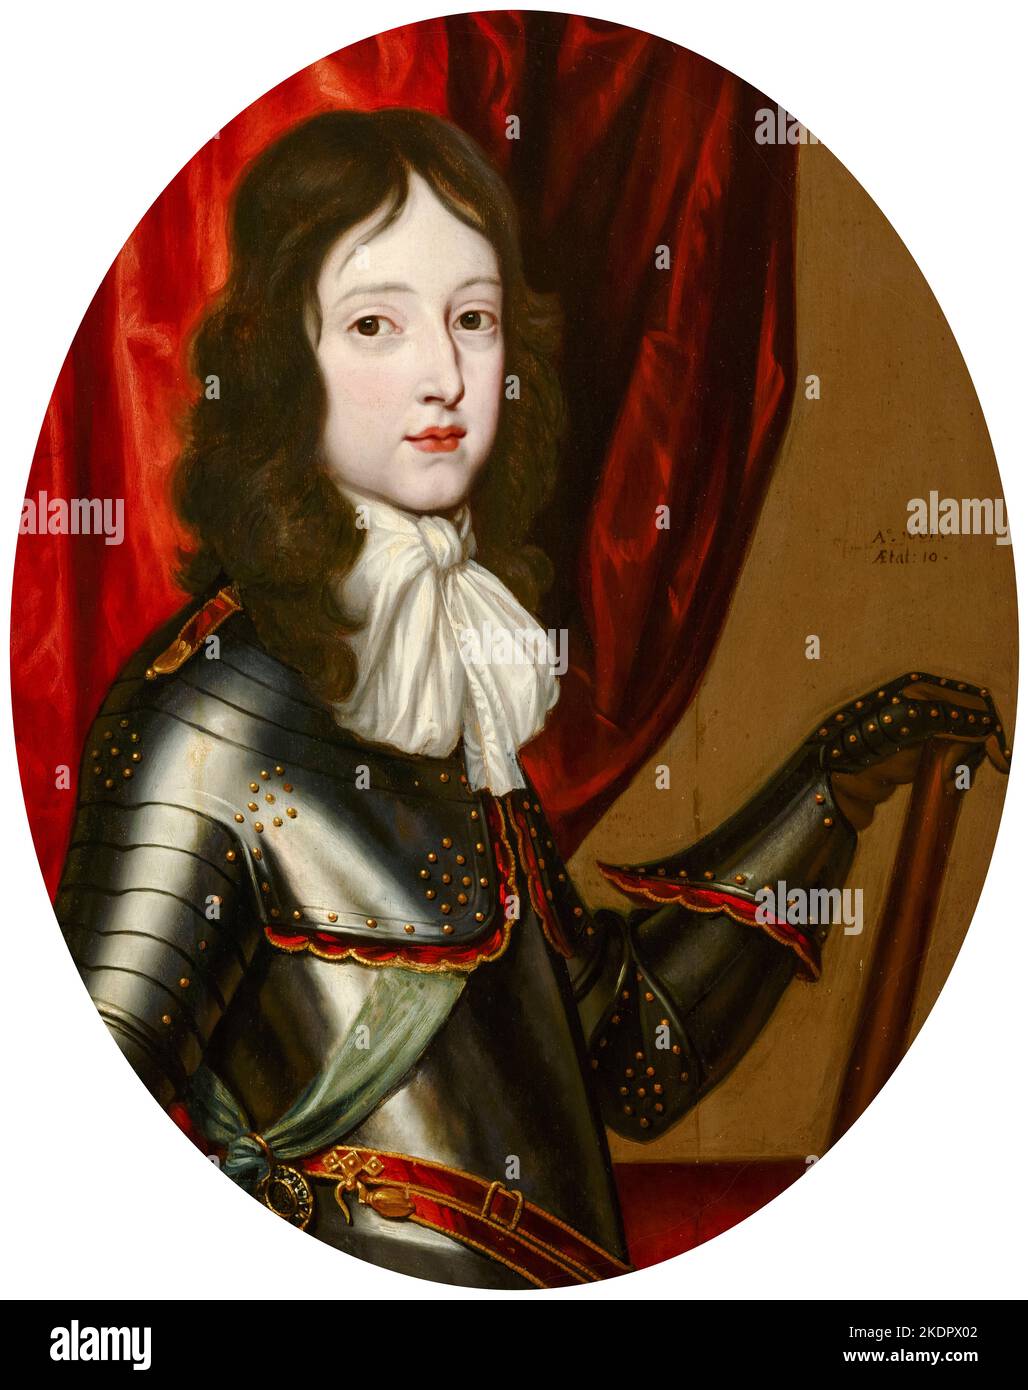 William III (1650-1702) Prince of Orange and King of England, Scotland, and Ireland (1689-1702) as a boy aged Ten, portrait painting in oil on panel by Abraham Ragueneau, 1661 Stock Photo